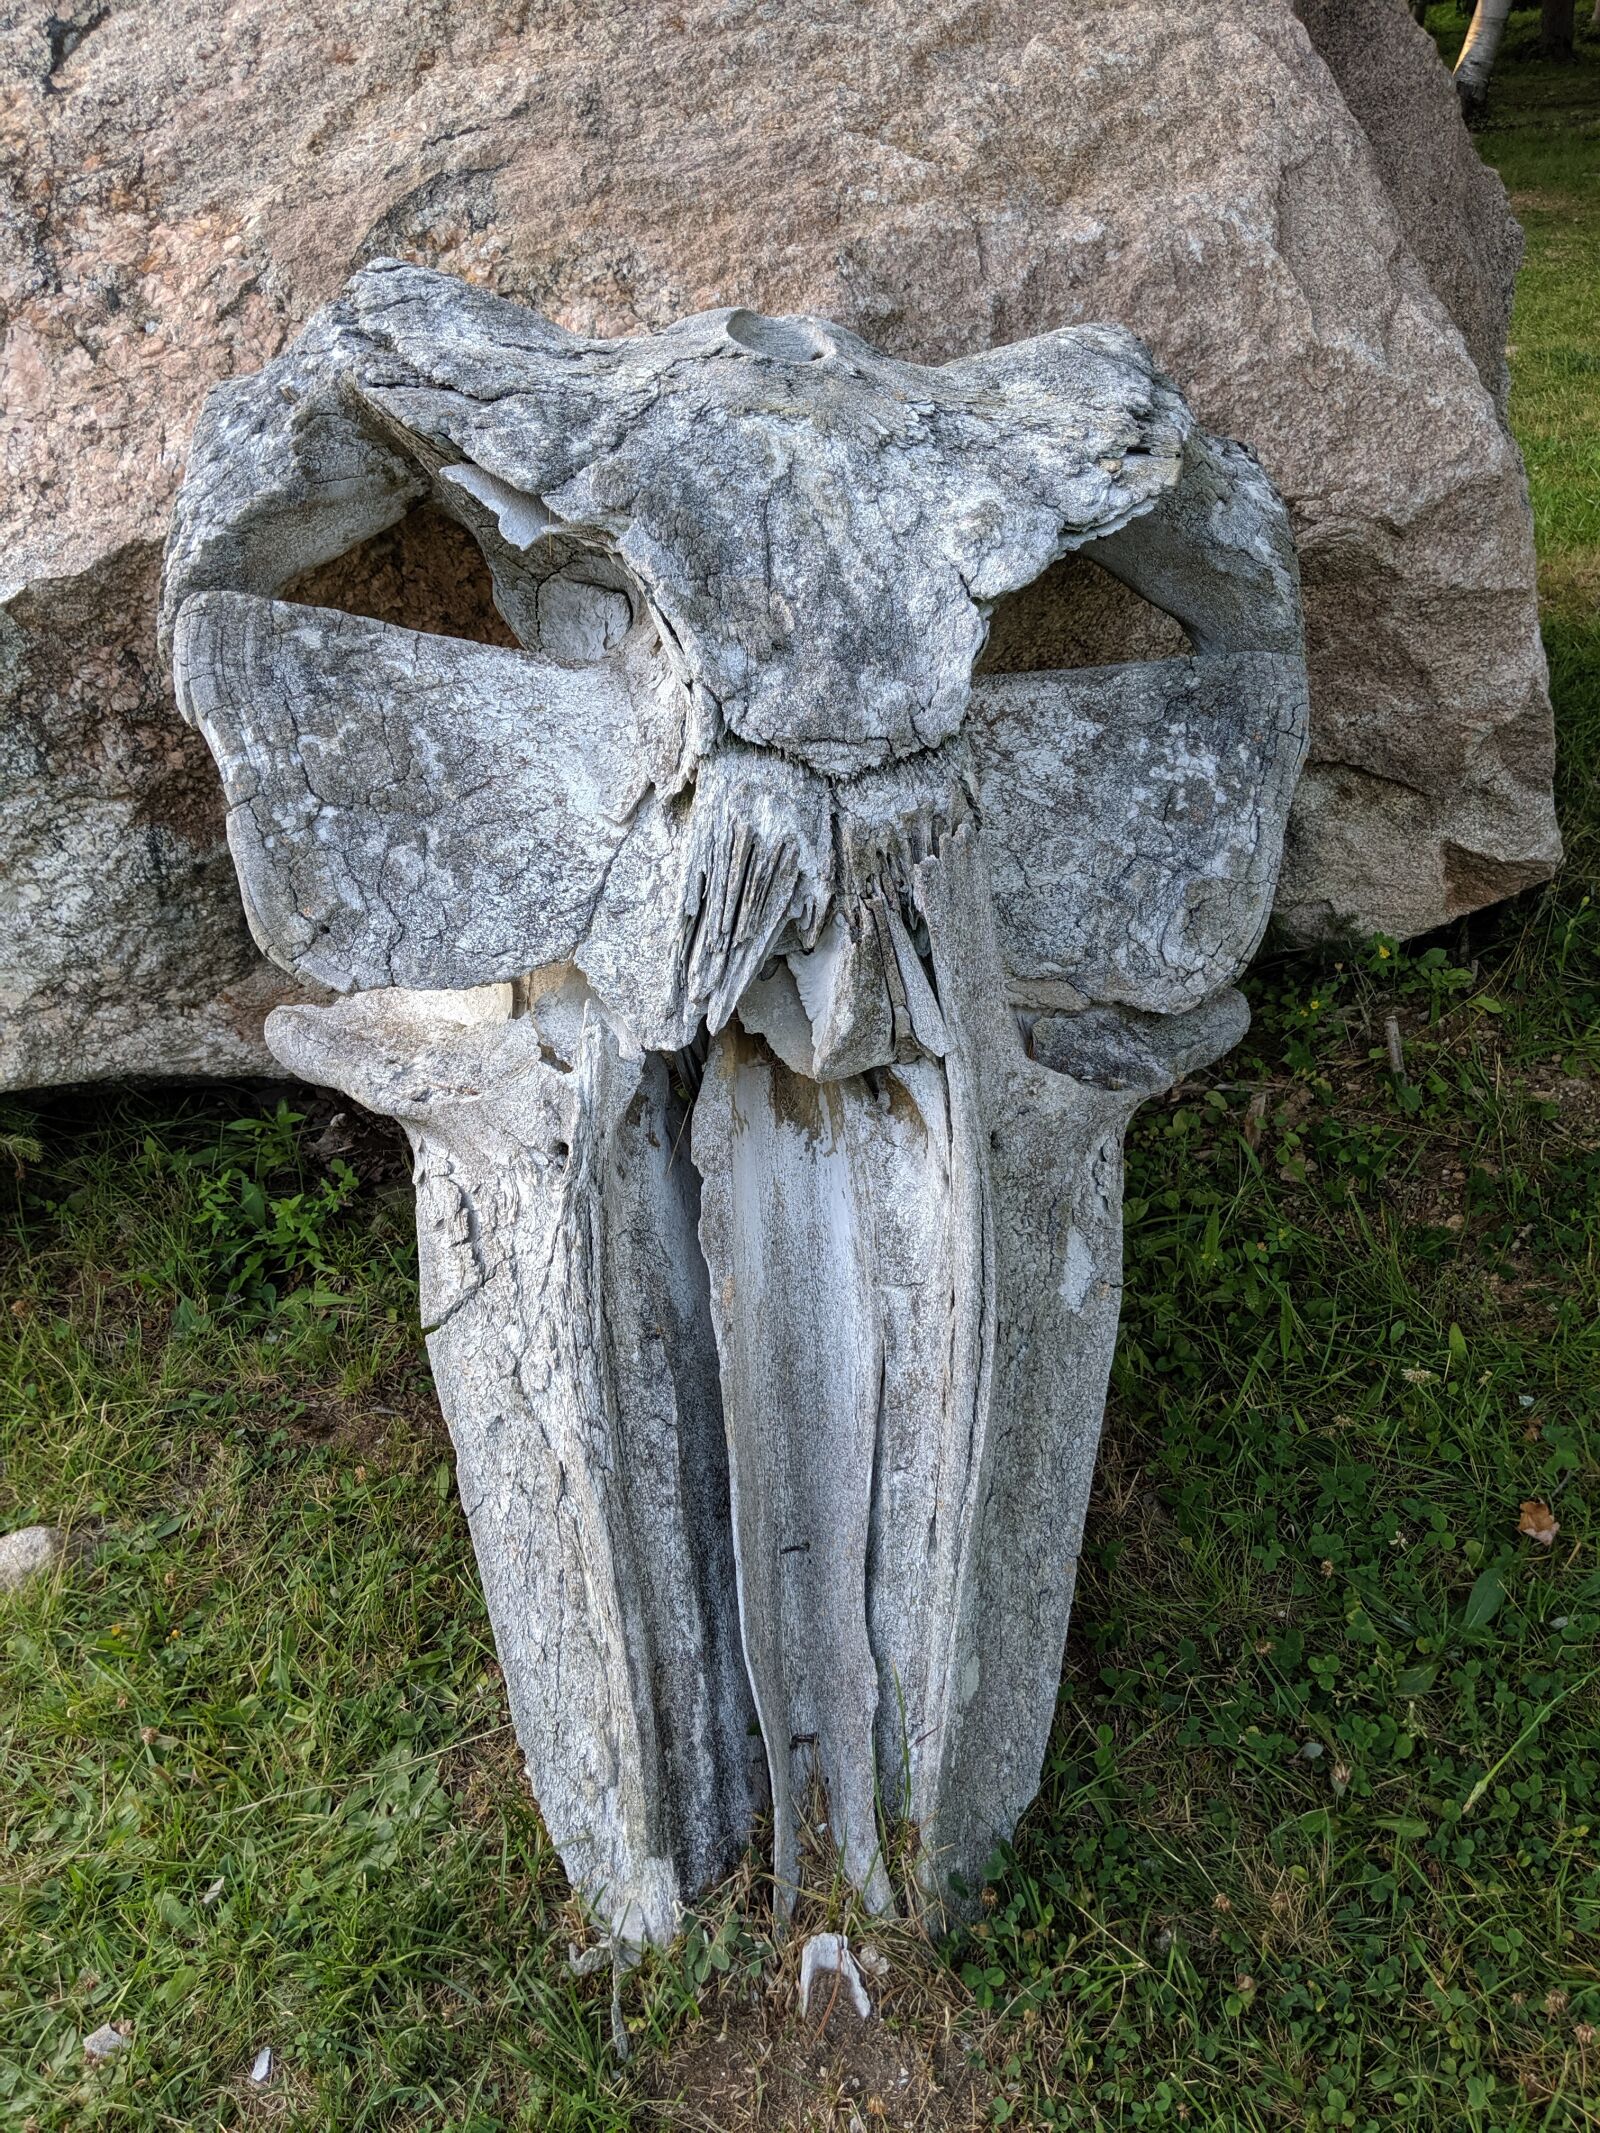 Google Pixel 3 XL sample photo. Whale, whale skull, whale photography